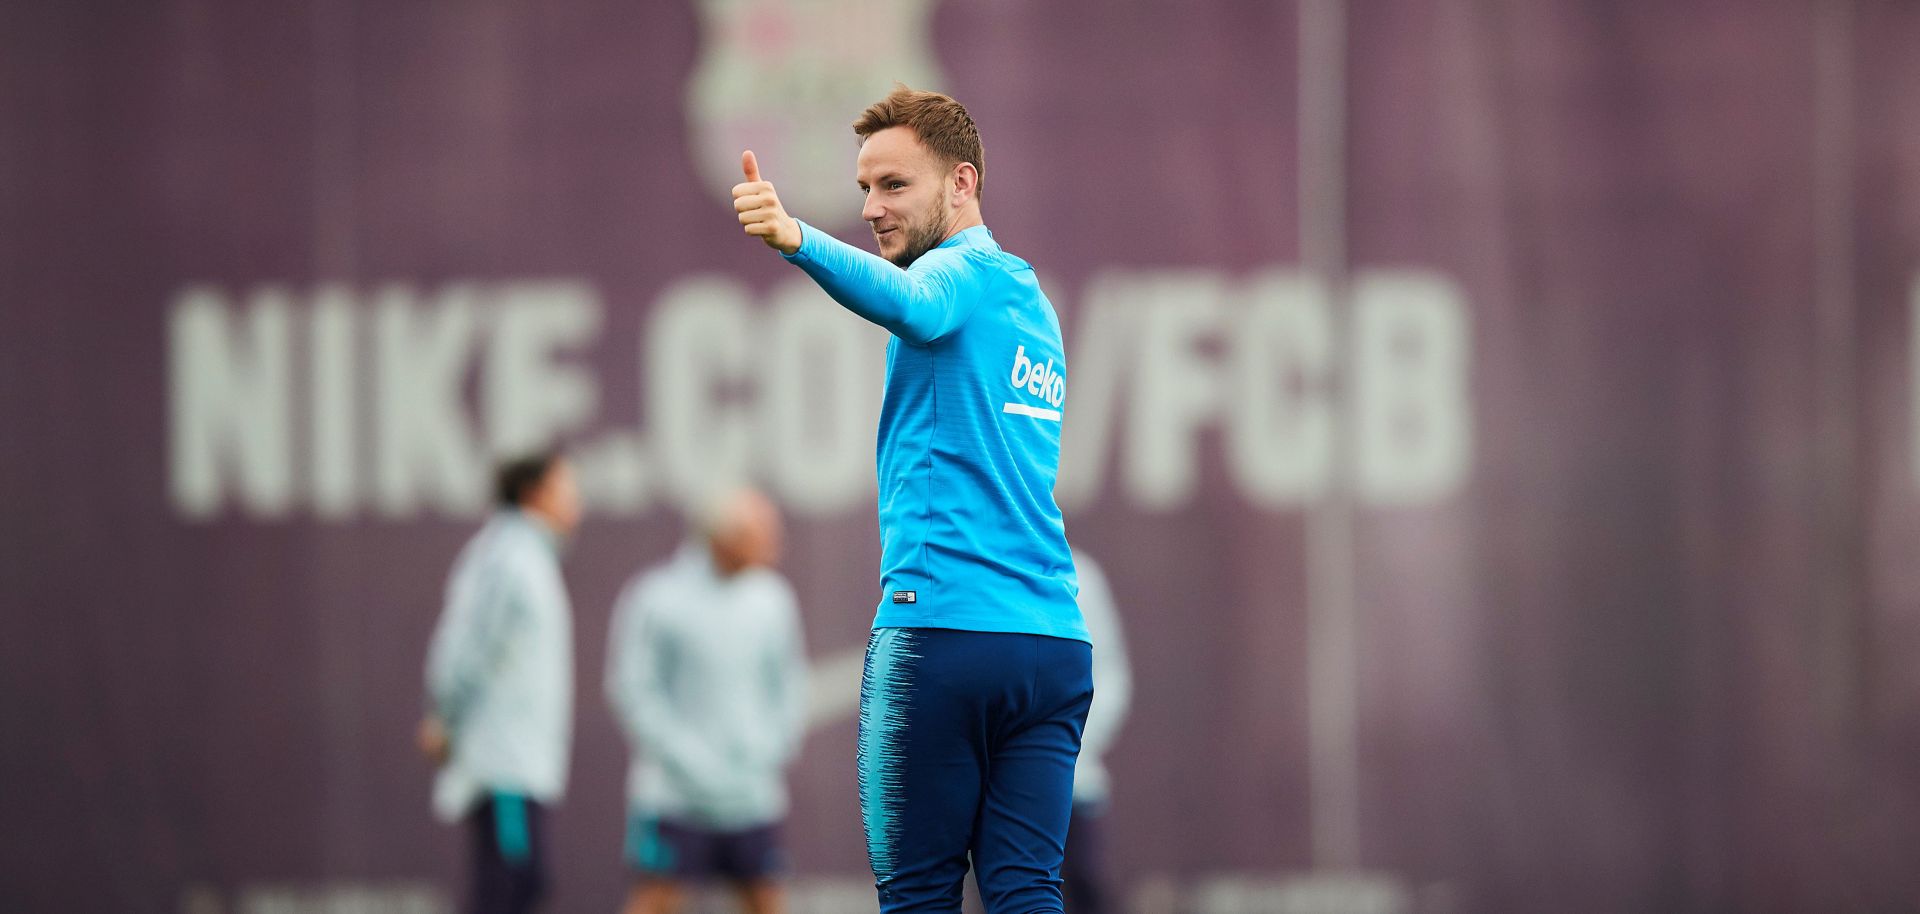 epa07521670 FC Barcelona's midfielder Ivan Rakitic attends a training session at Joan Gamper sport complex in Barcelona, Spain, 22 April 2019, on the eve of their Spanish LaLiga soccer match against Deportivo Alaves.  EPA/Alejandro Garcia